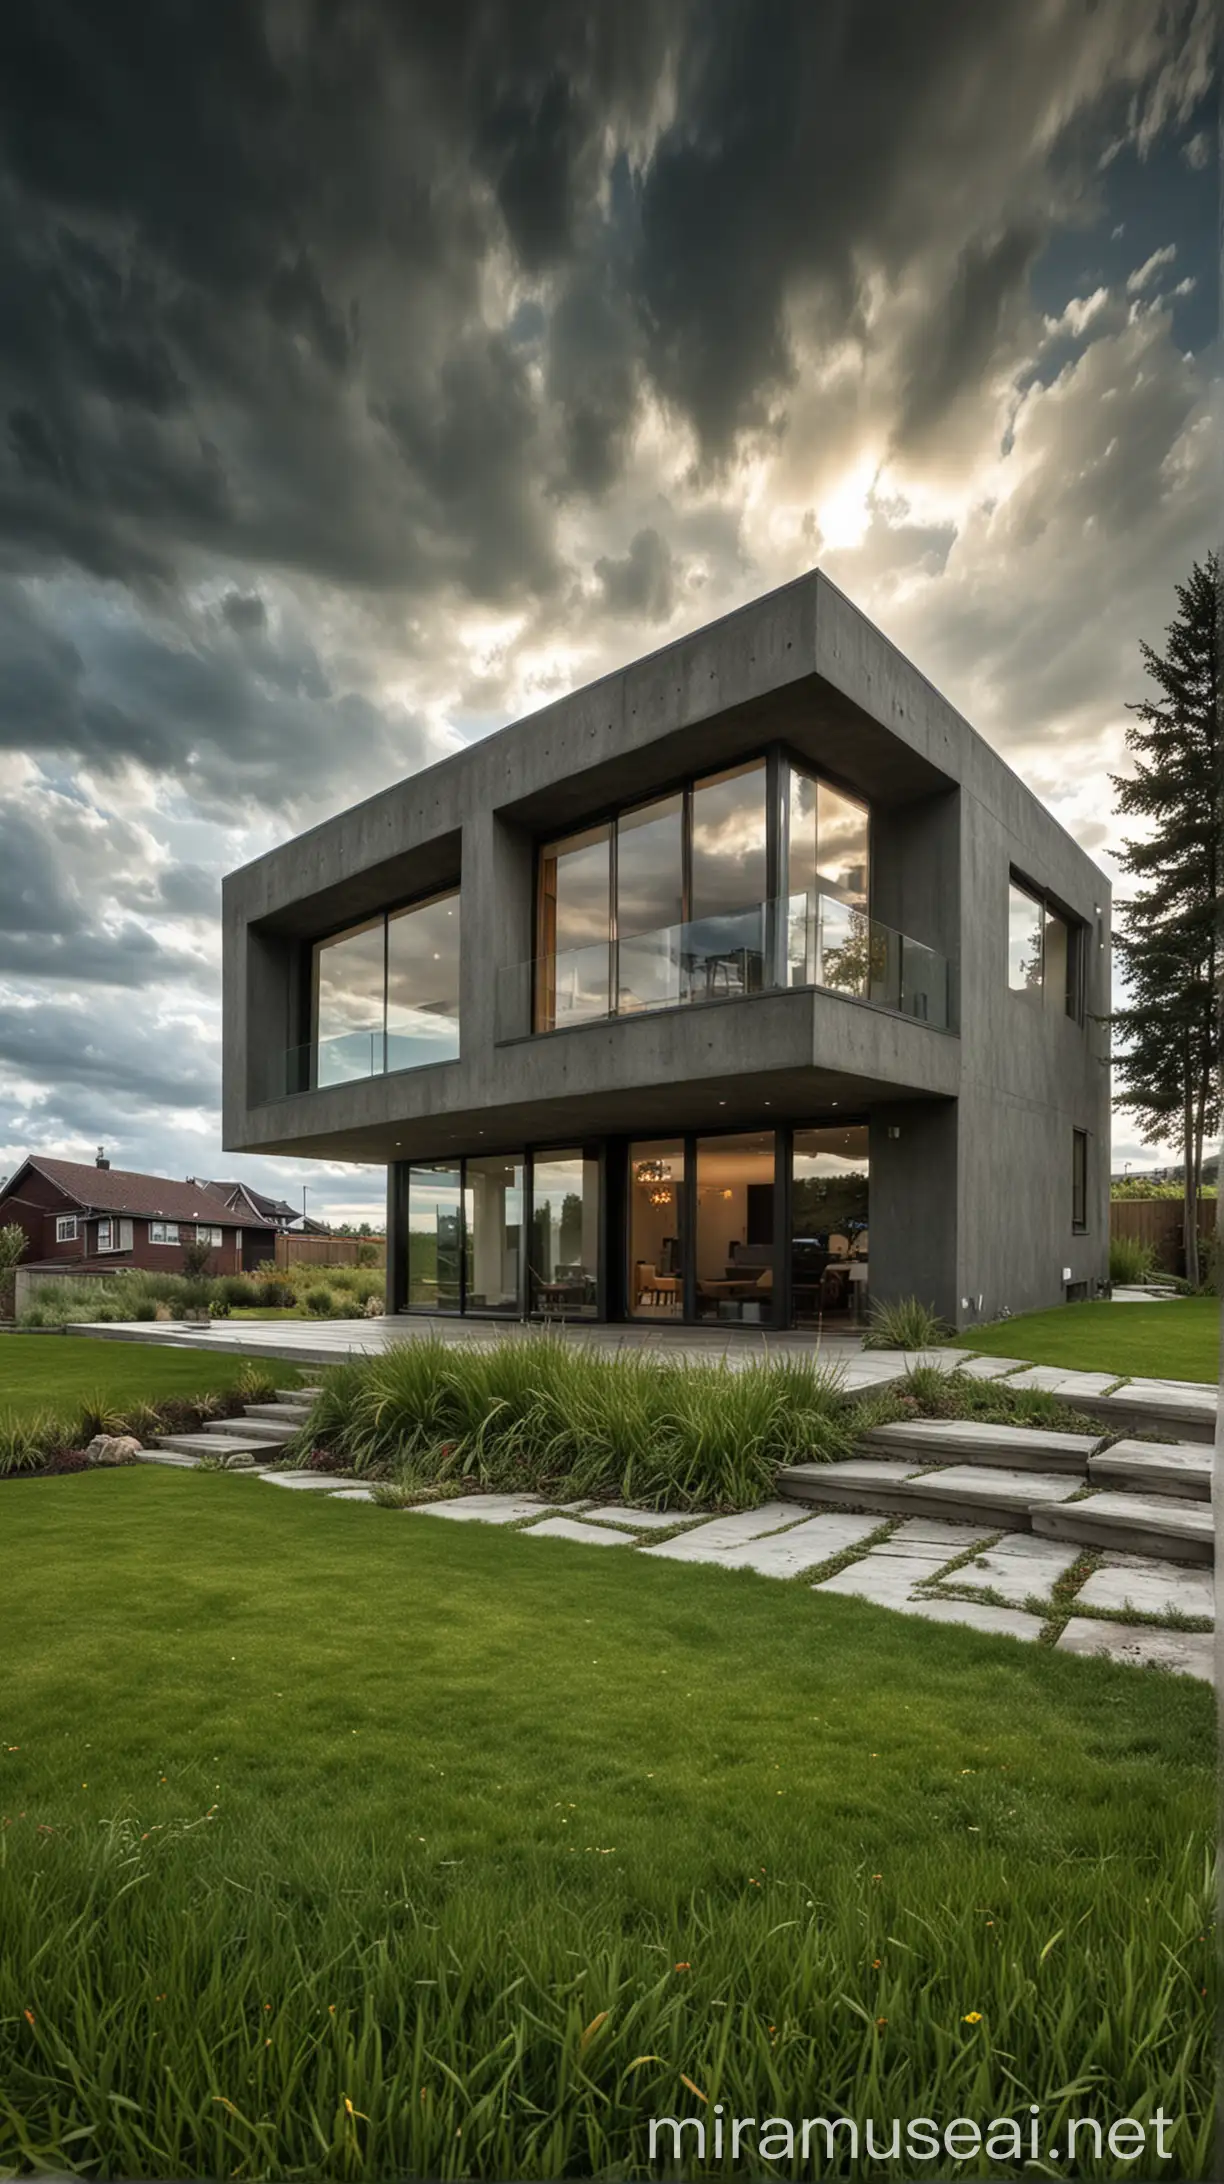 Bright Modern House Surrounded by Grassy Landscape Under a Cloudy Sky